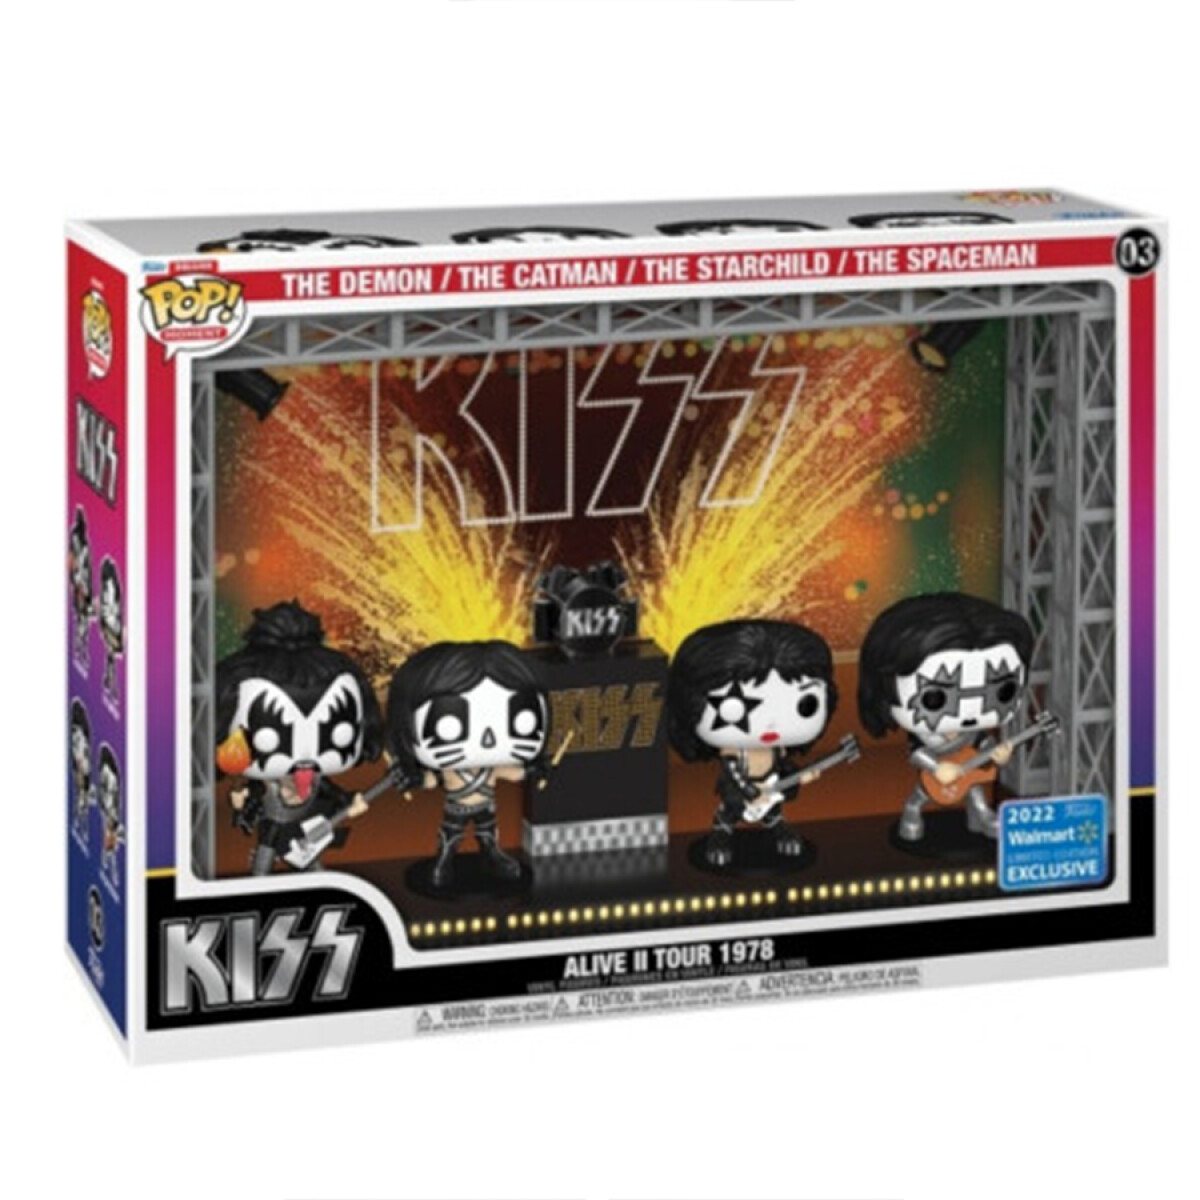 Alive II In Tour 1978 • Kiss [Exclusivo] - 03 